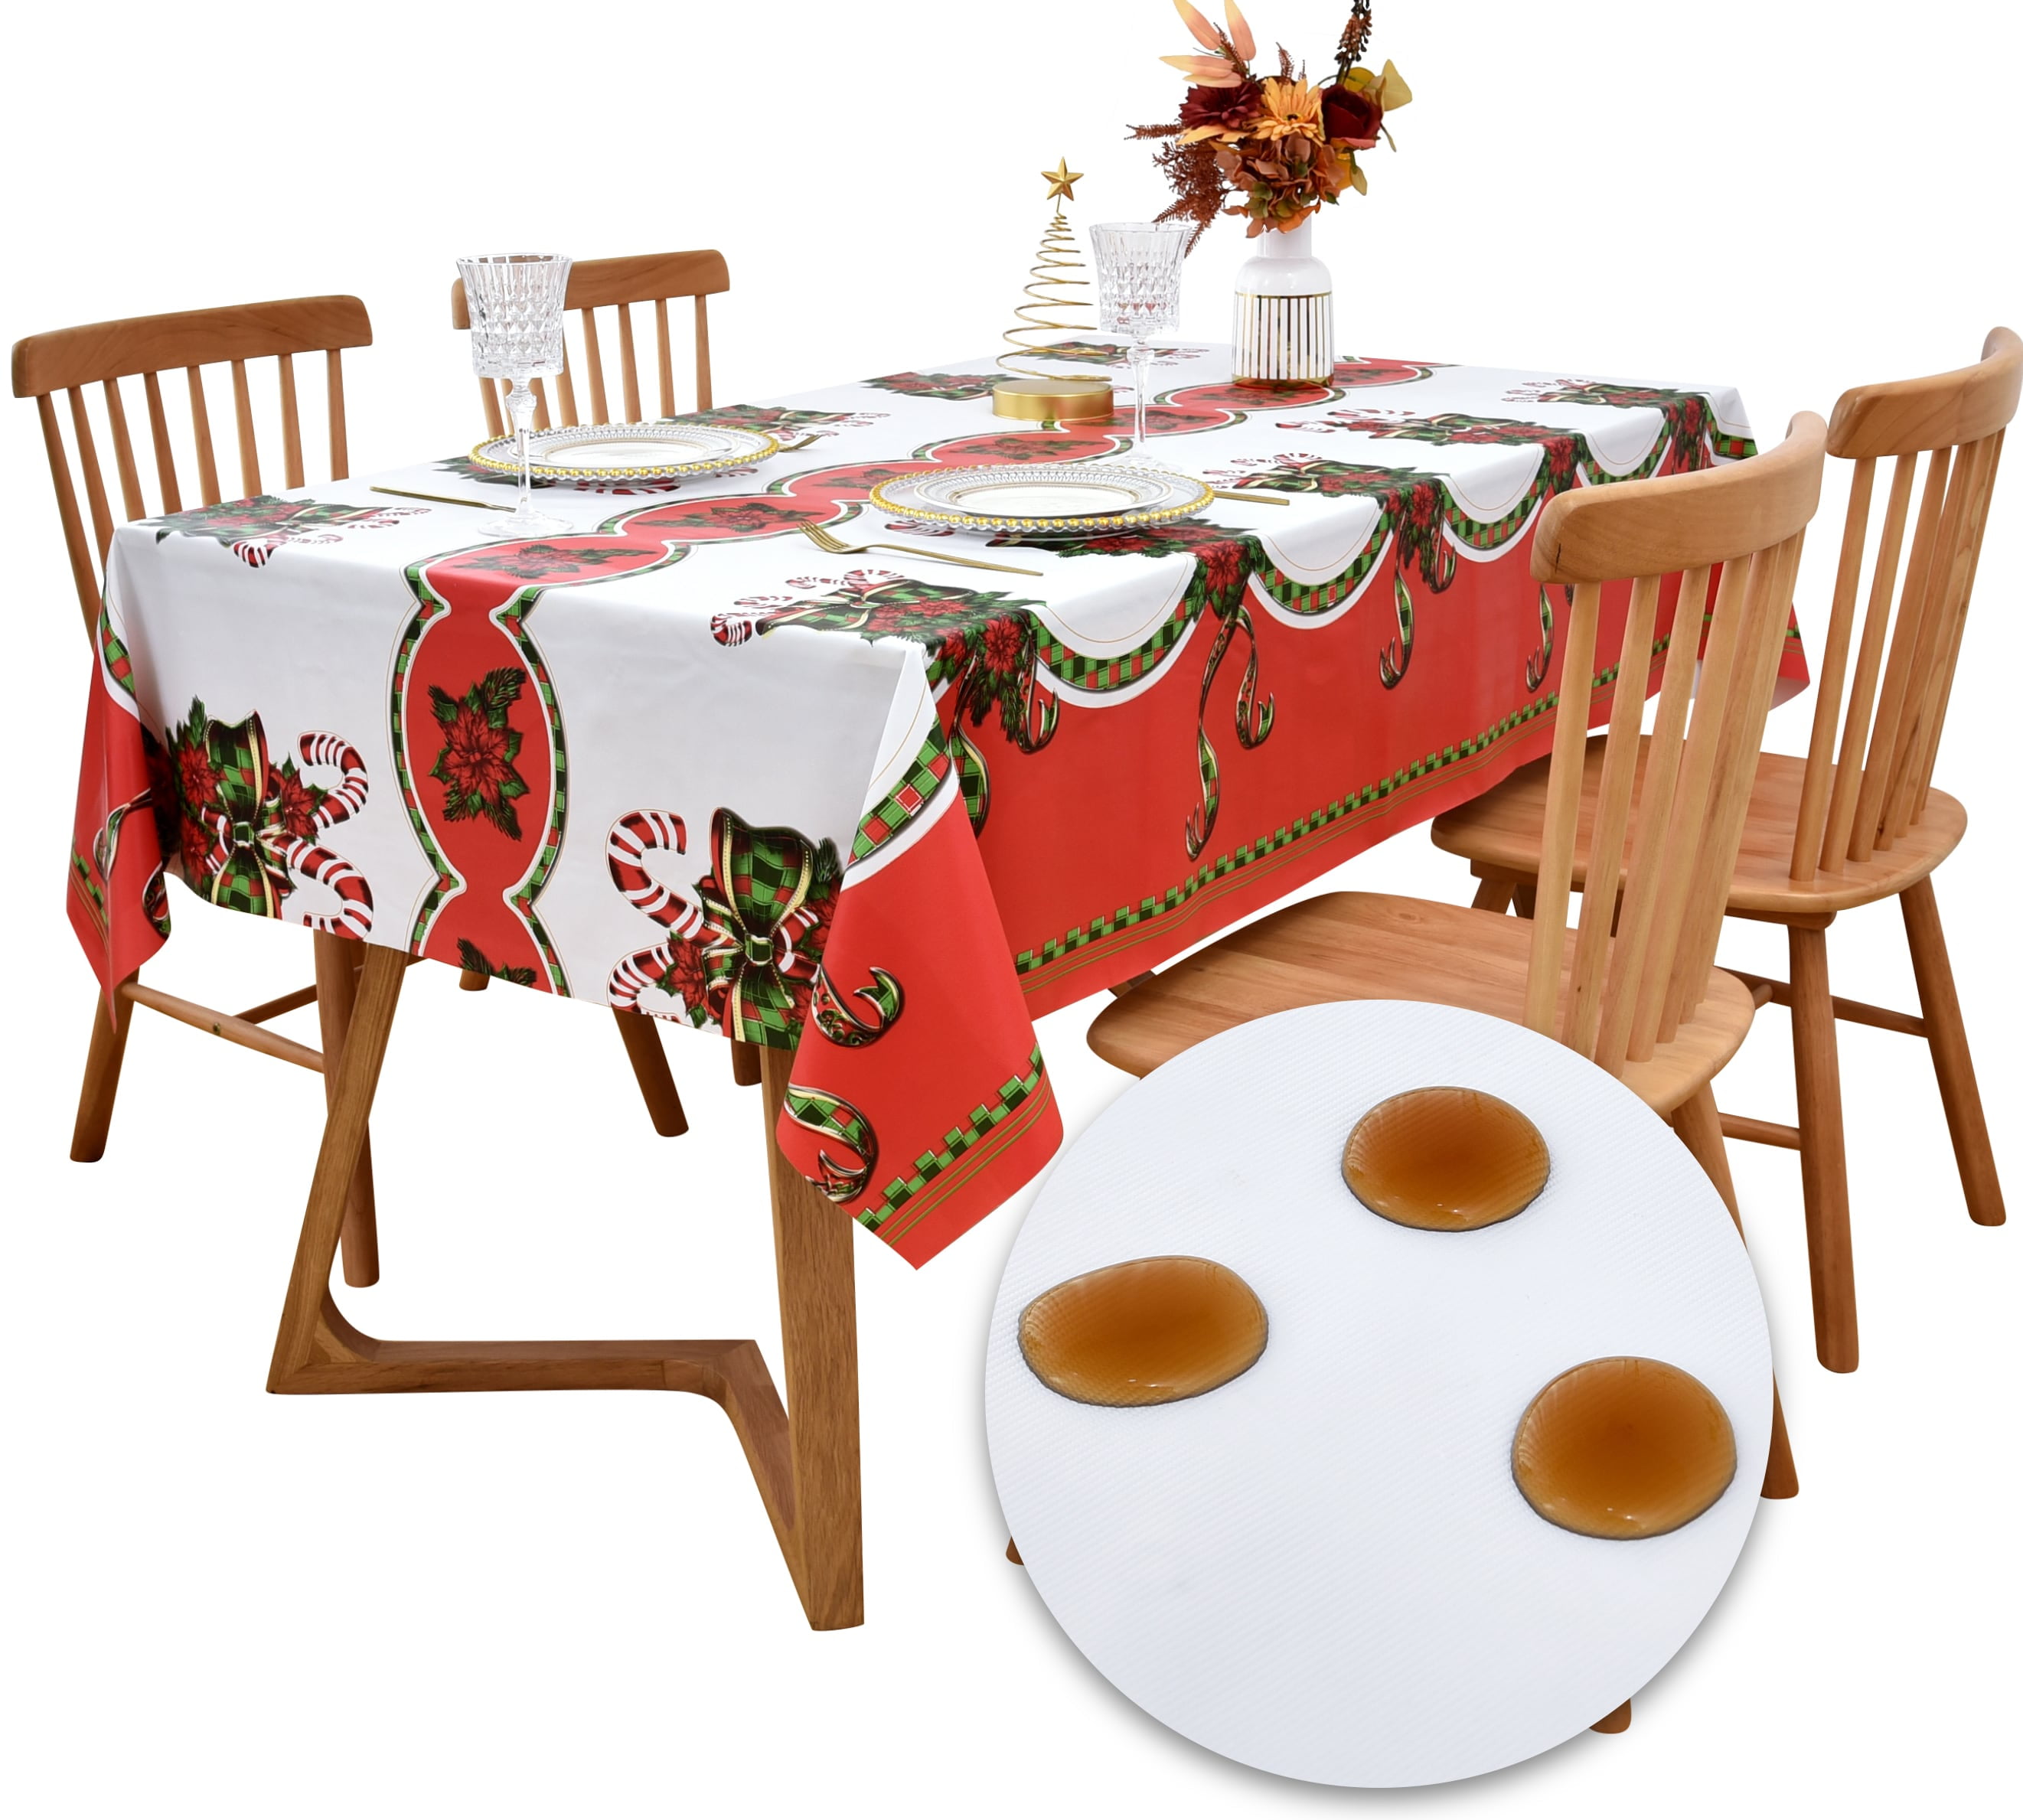 Picnic 52 Inch x 52 Inch Square Barbeque Grape Theme Indoor/Outdoor Waterproof Tablecloth Newbridge Grapevine Vinyl Flannel Backed Tablecloth Patio and Kitchen Dining